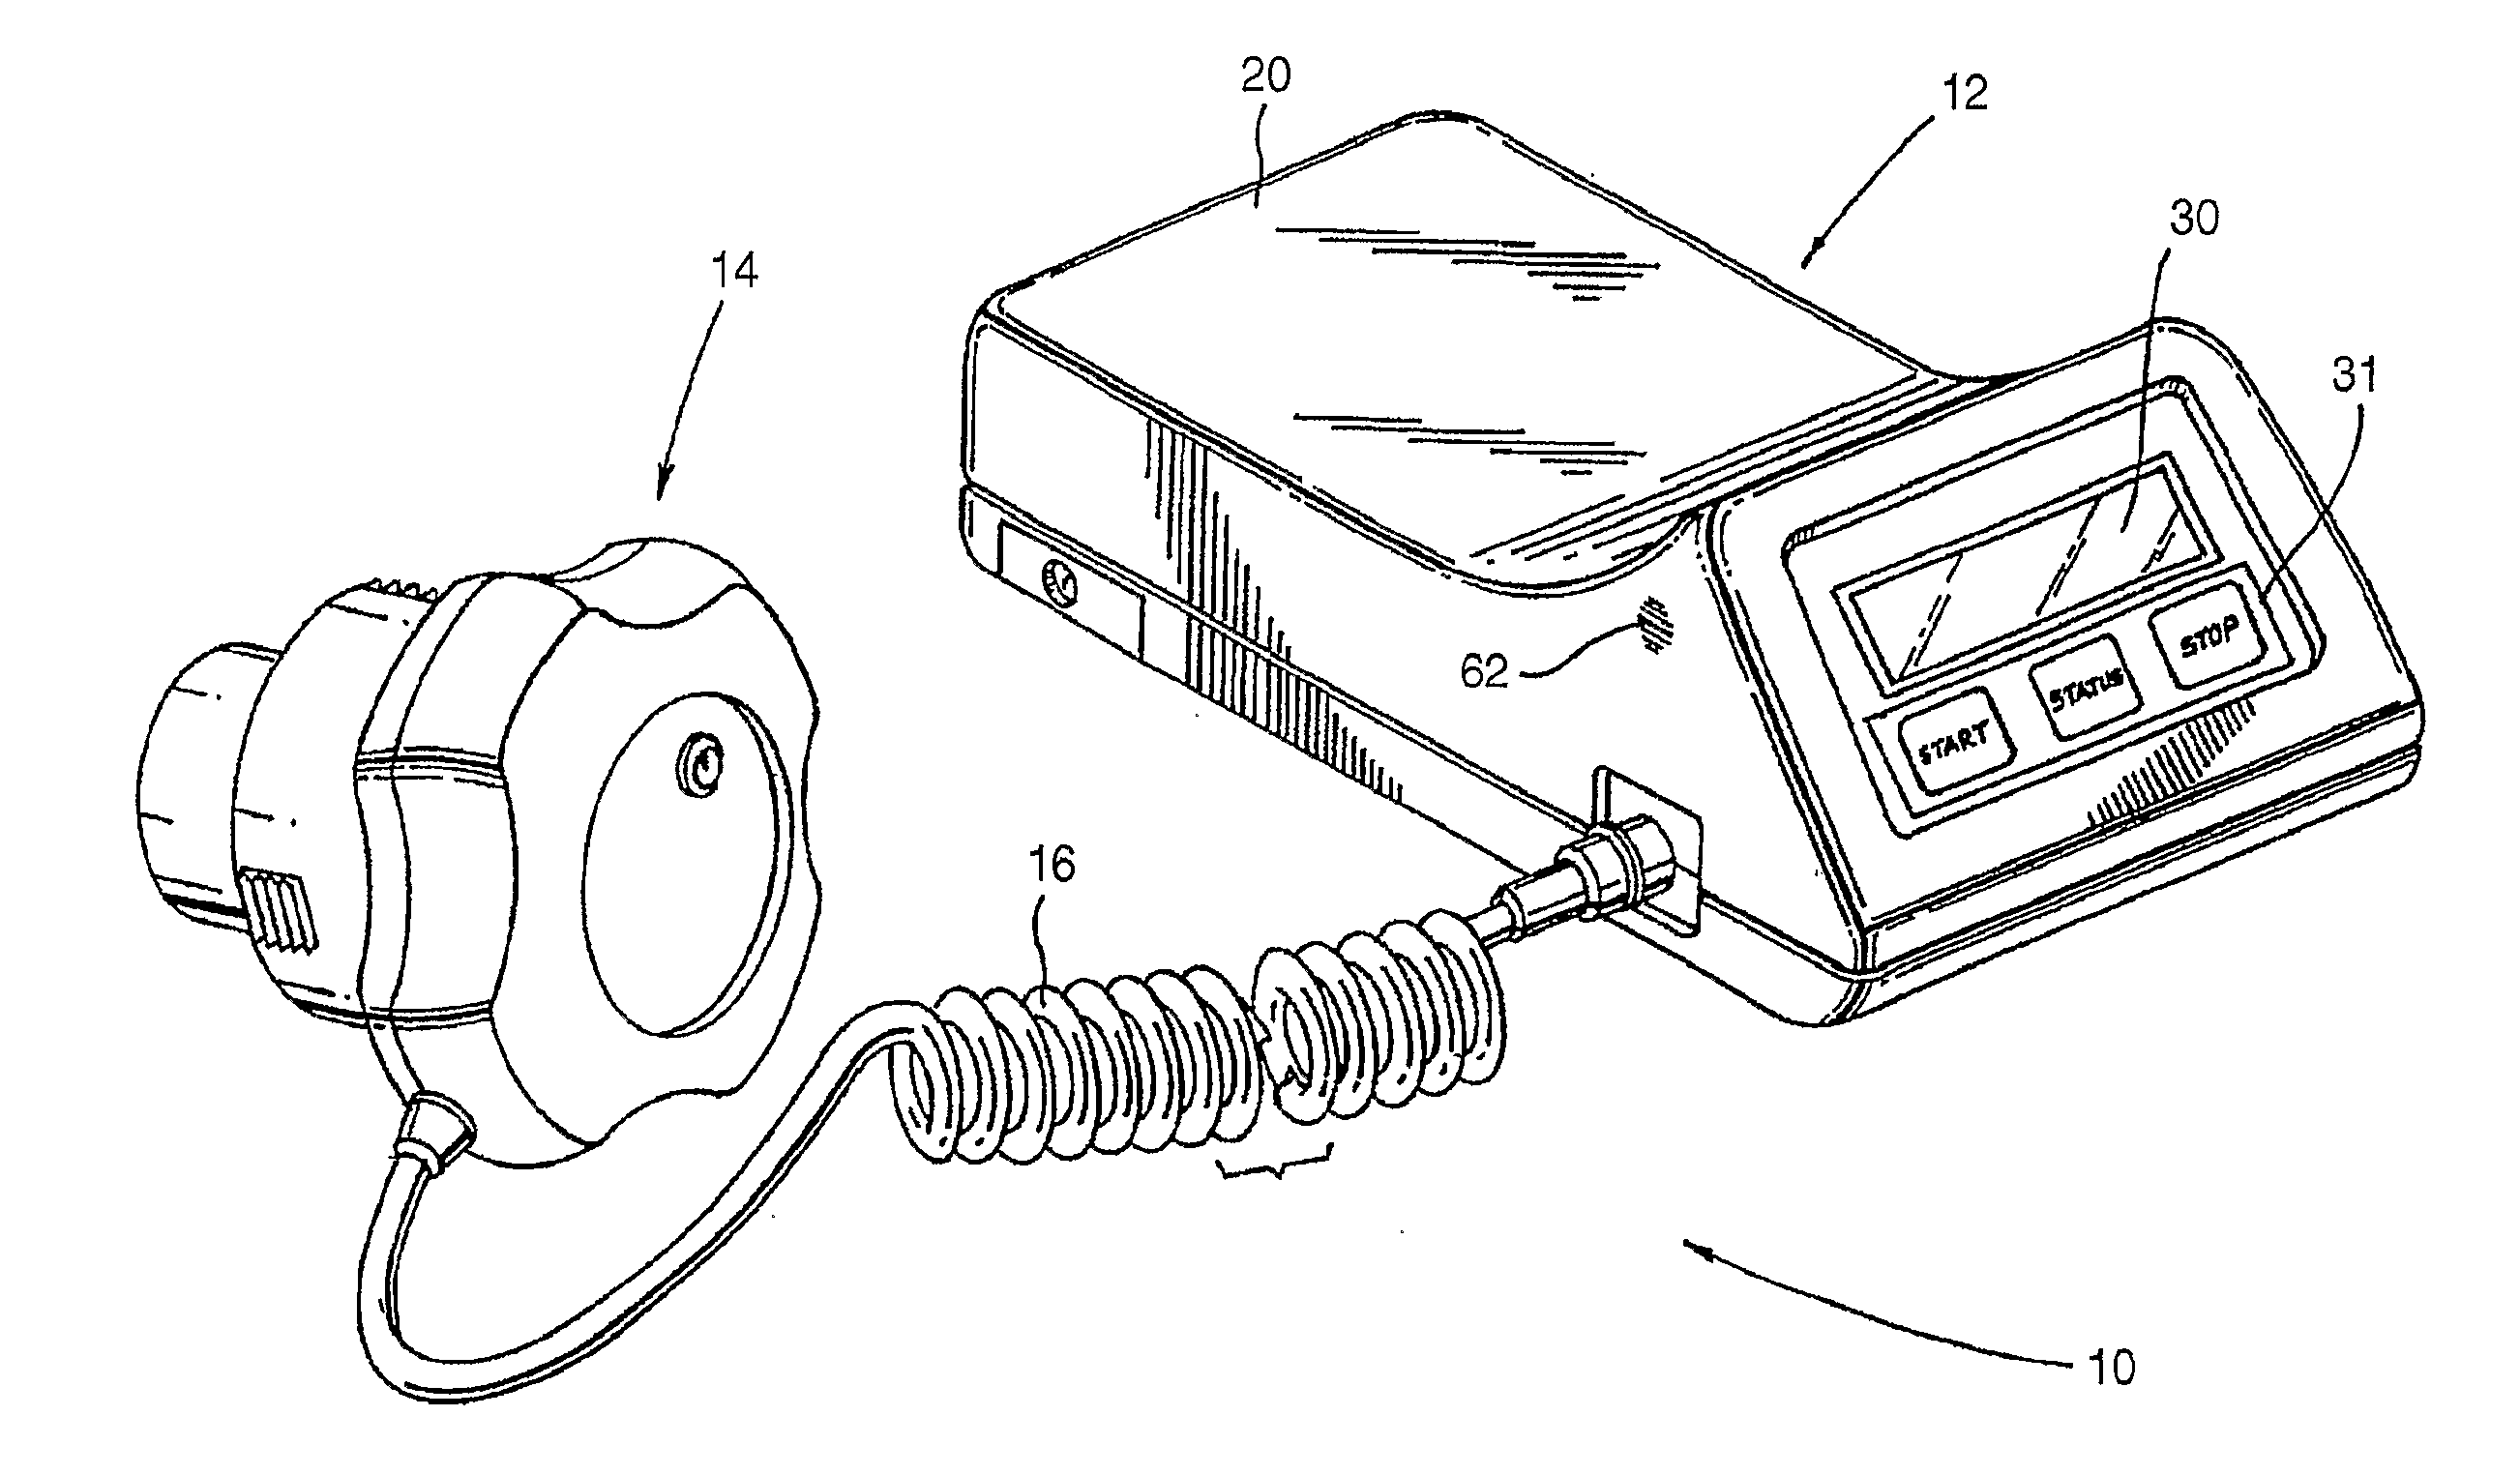 Apparatus and method for mounting a therapeutic device